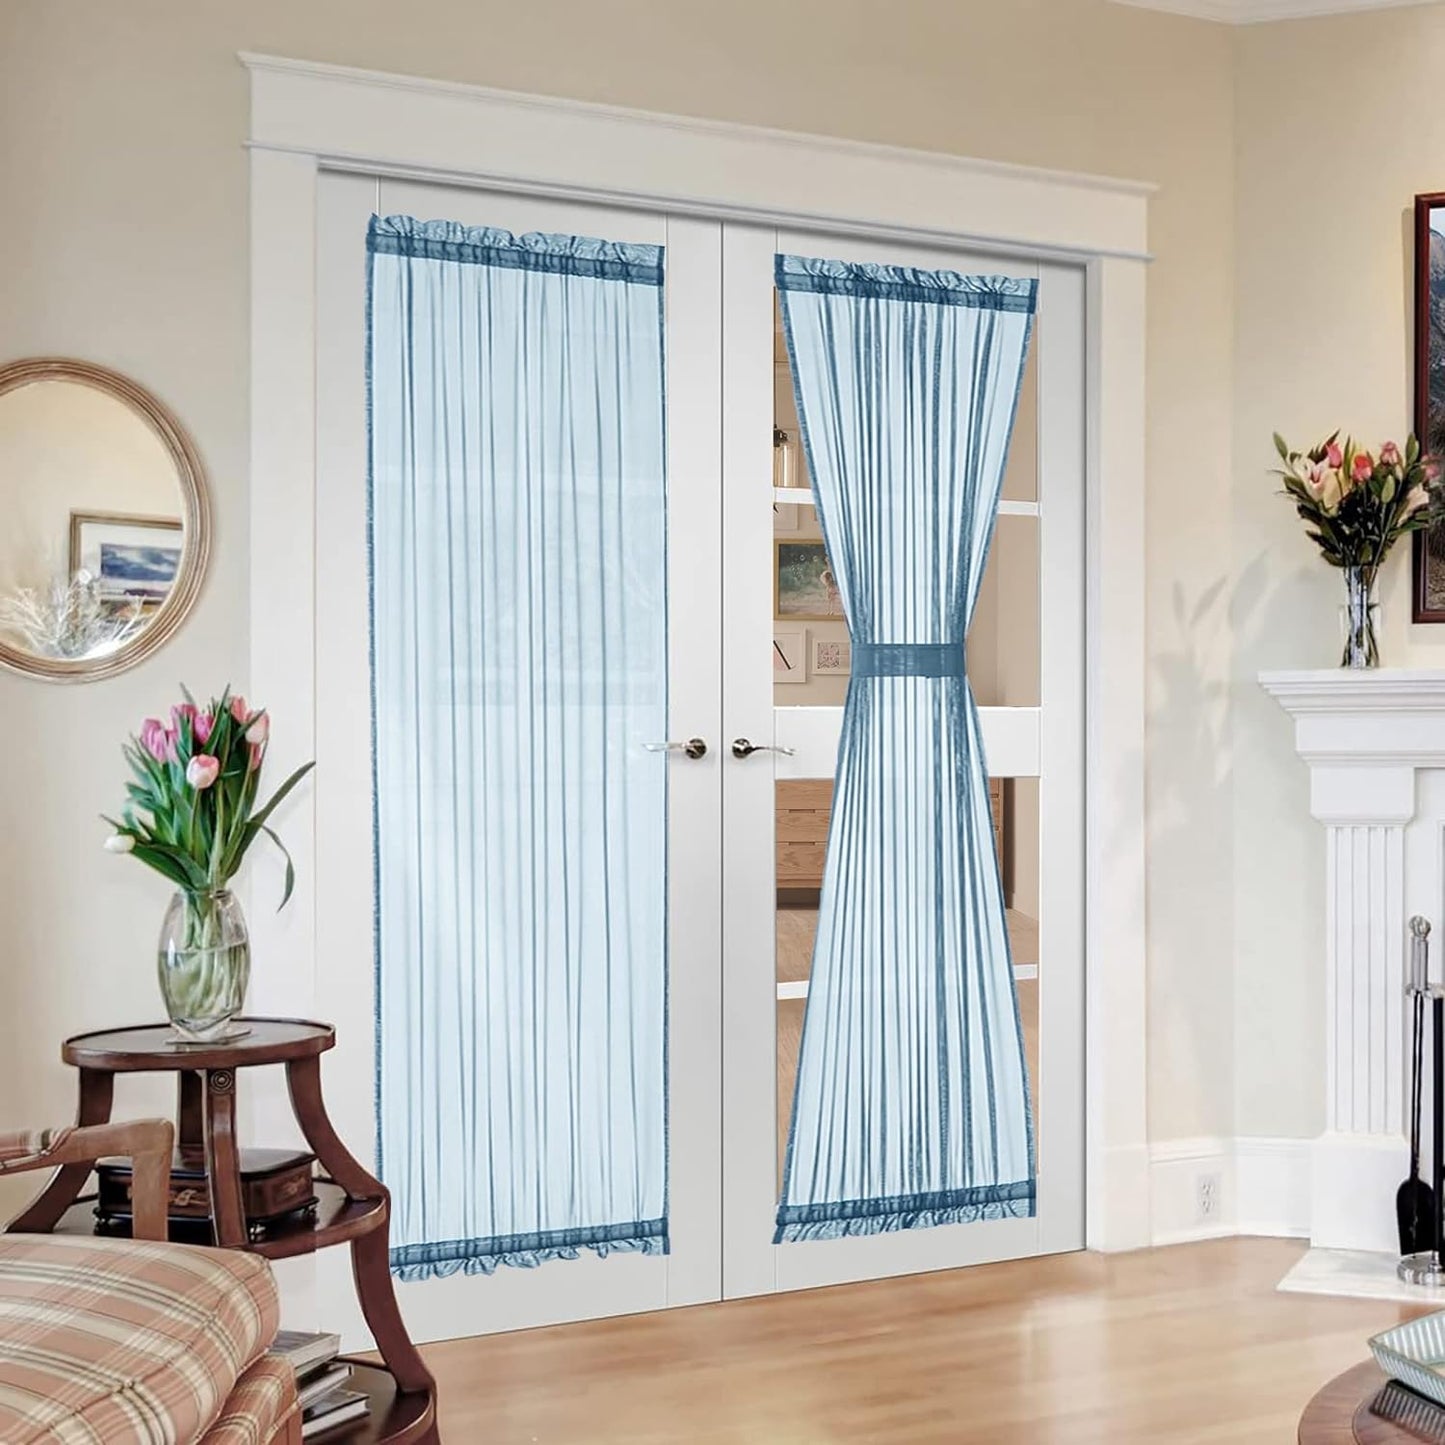 MIULEE French Door Sheer Curtains for Front Back Patio Glass Door Light Filtering Window Treatment with 2 Tiebacks 54 Wide and 72 Inches Length, White, Set of 2  MIULEE Stone Blue 54"W X 72"L 